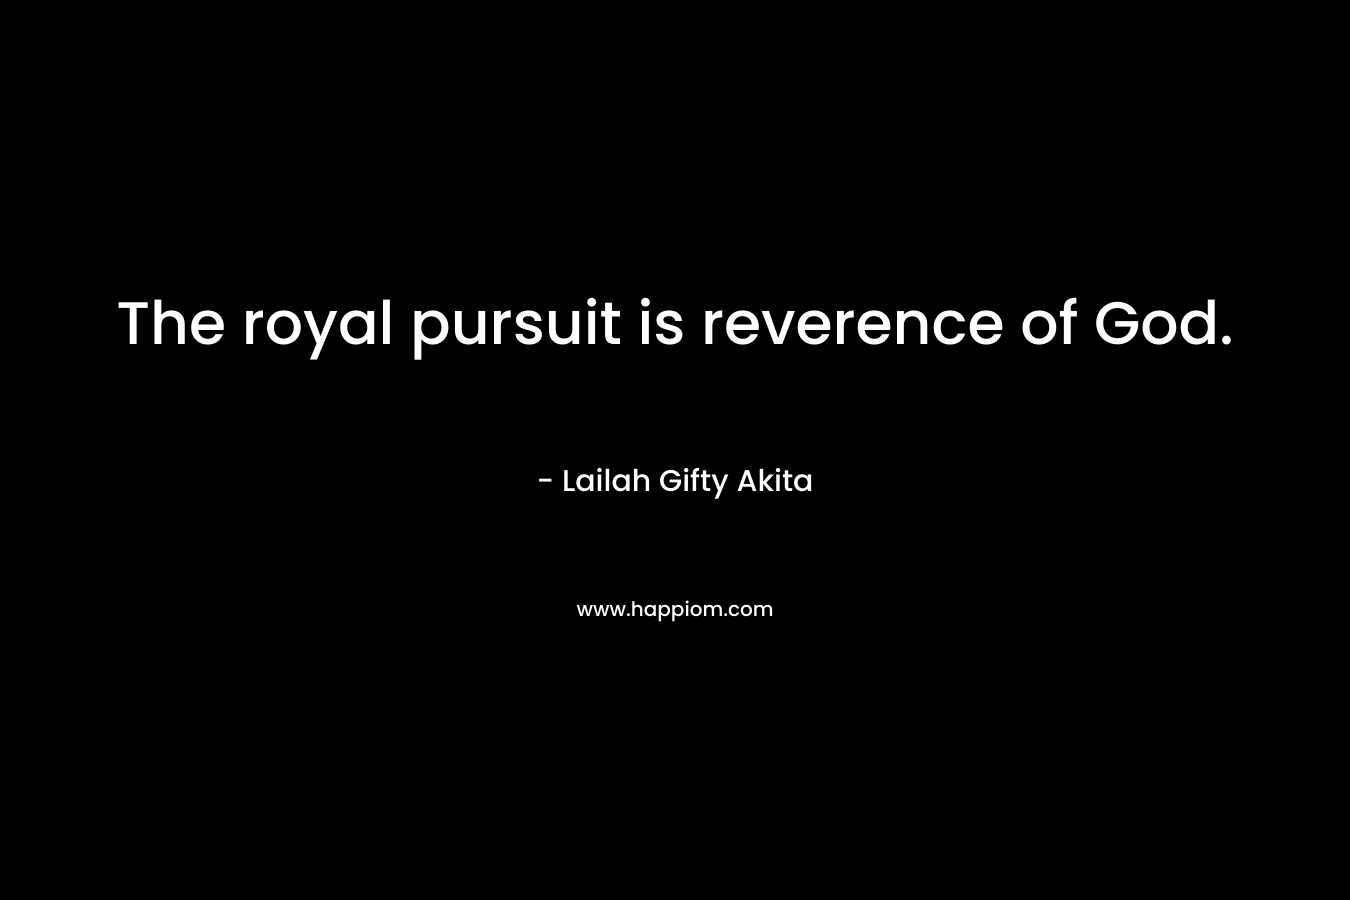 The royal pursuit is reverence of God.